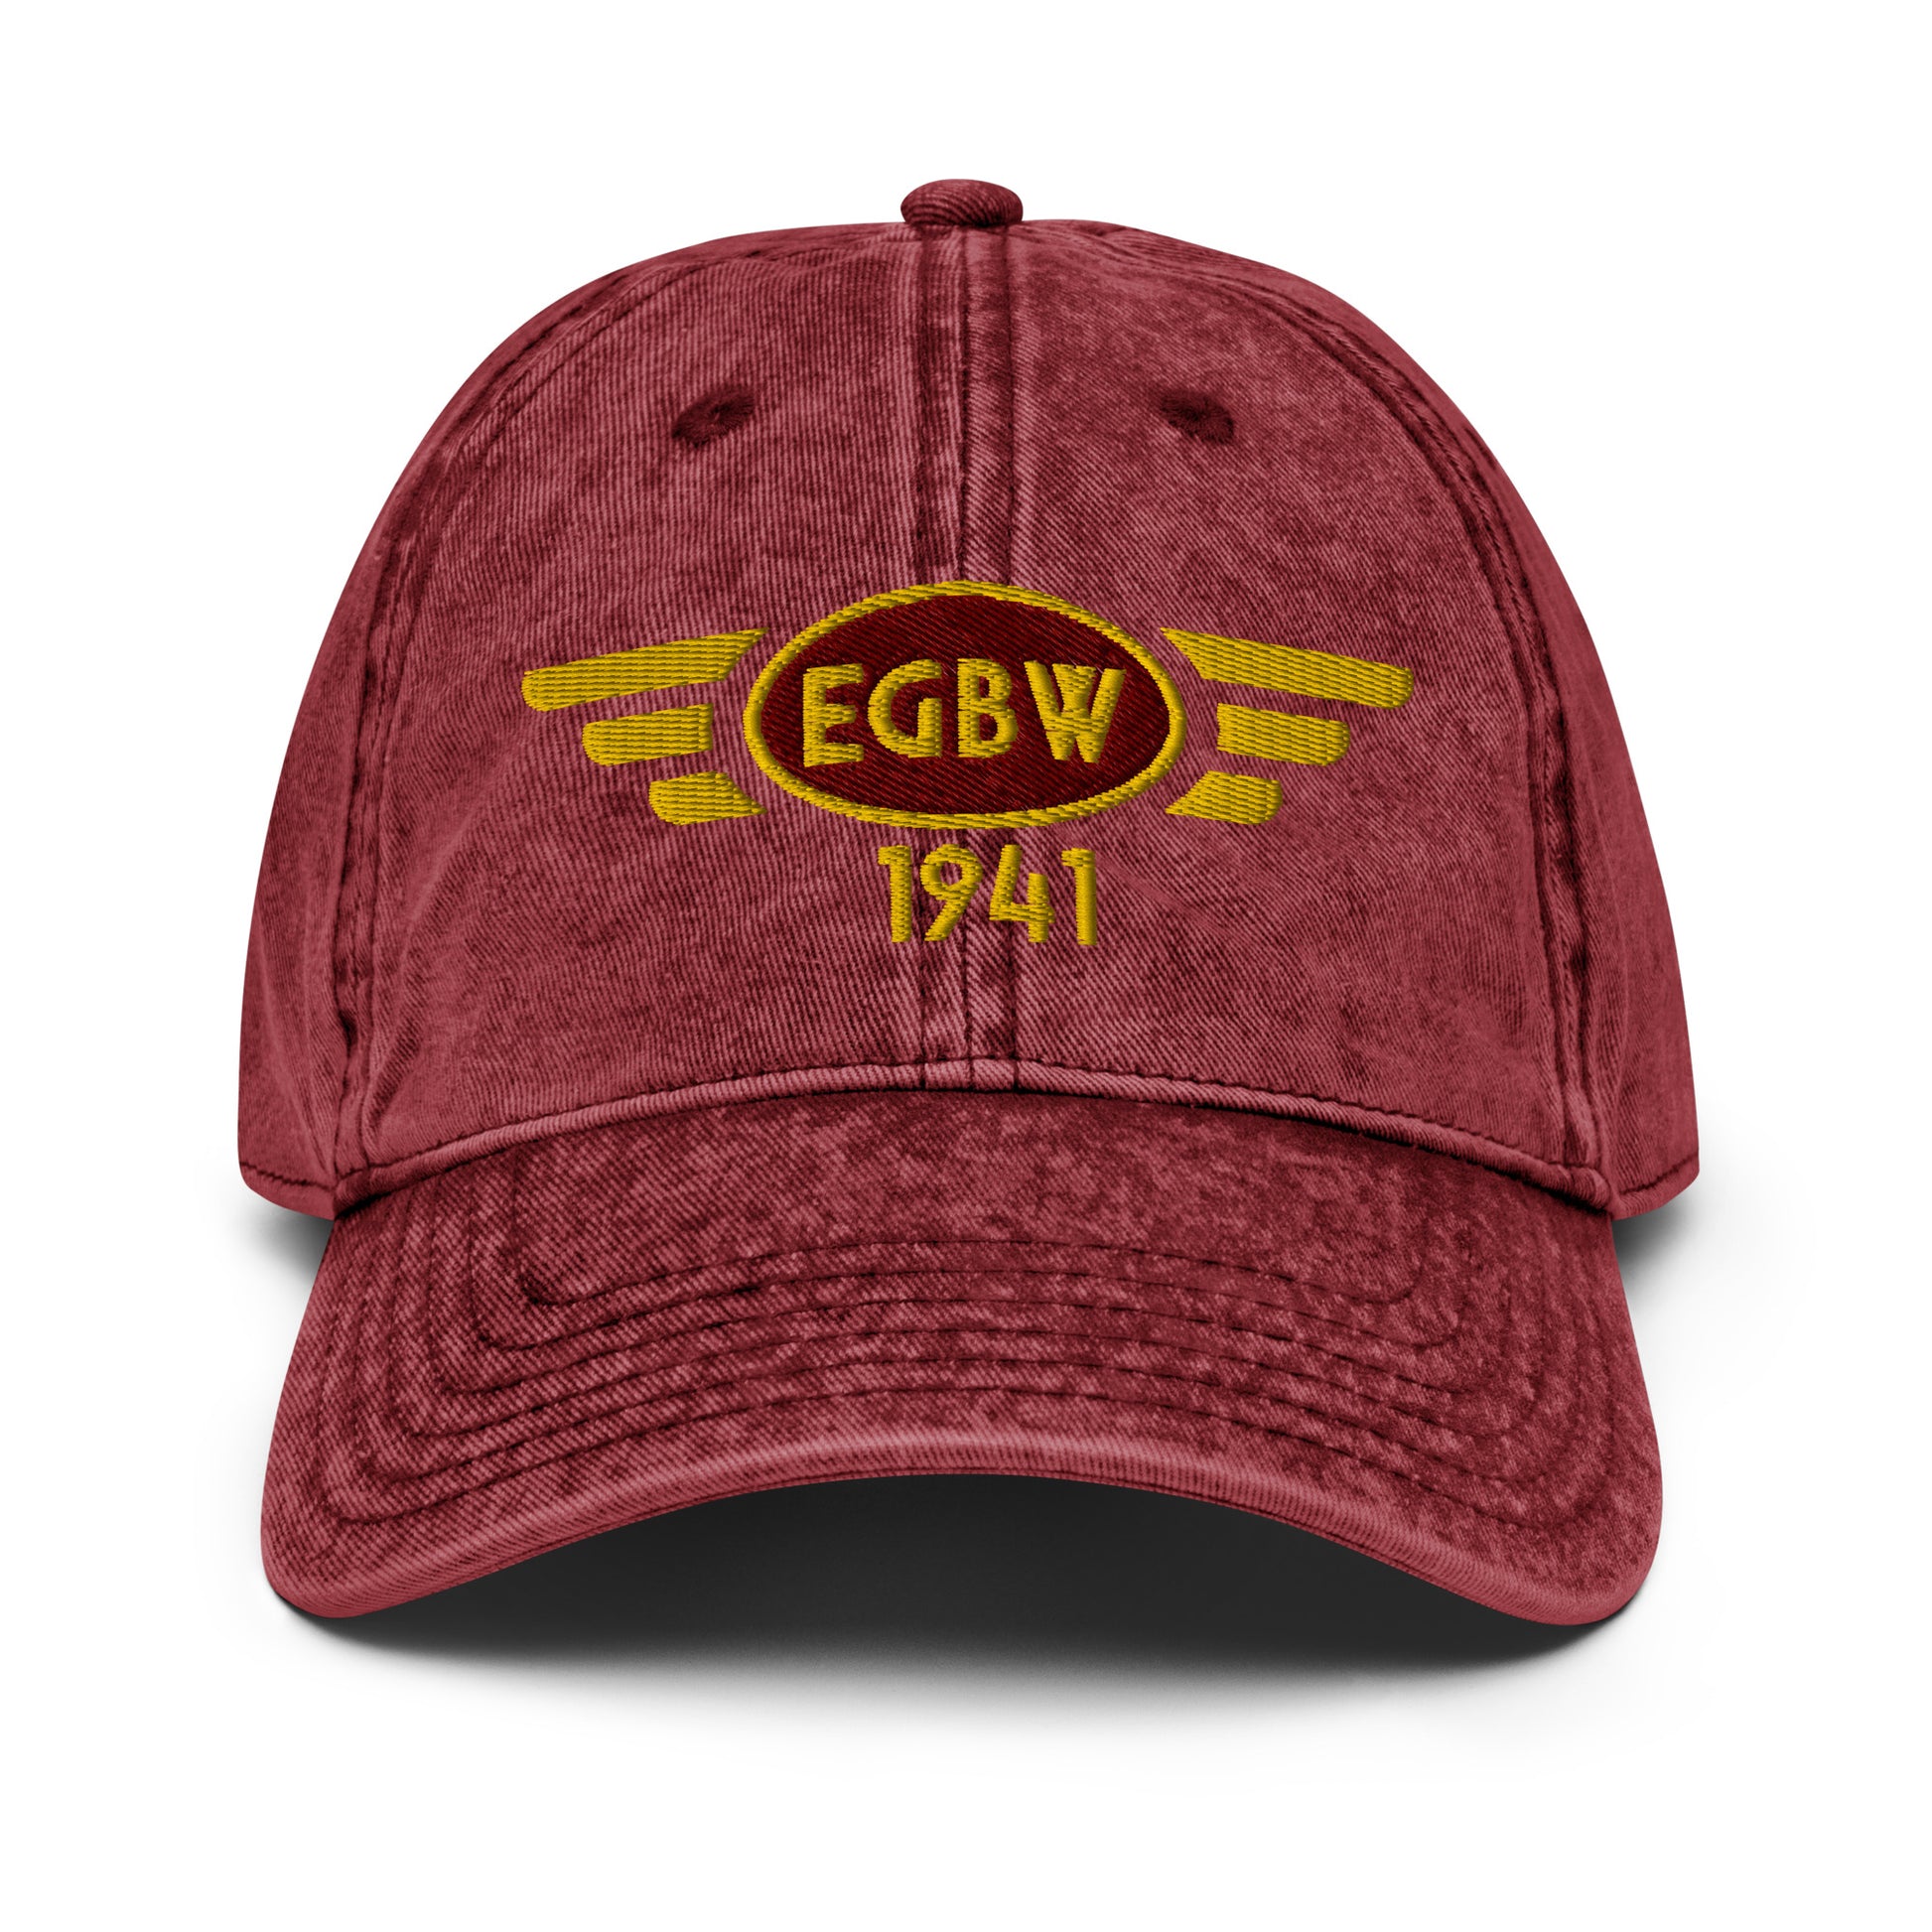 Burgundy coloured cotton twill baseball cap with embroidered vintage style aviation logo for Wellsbourne Airfield.